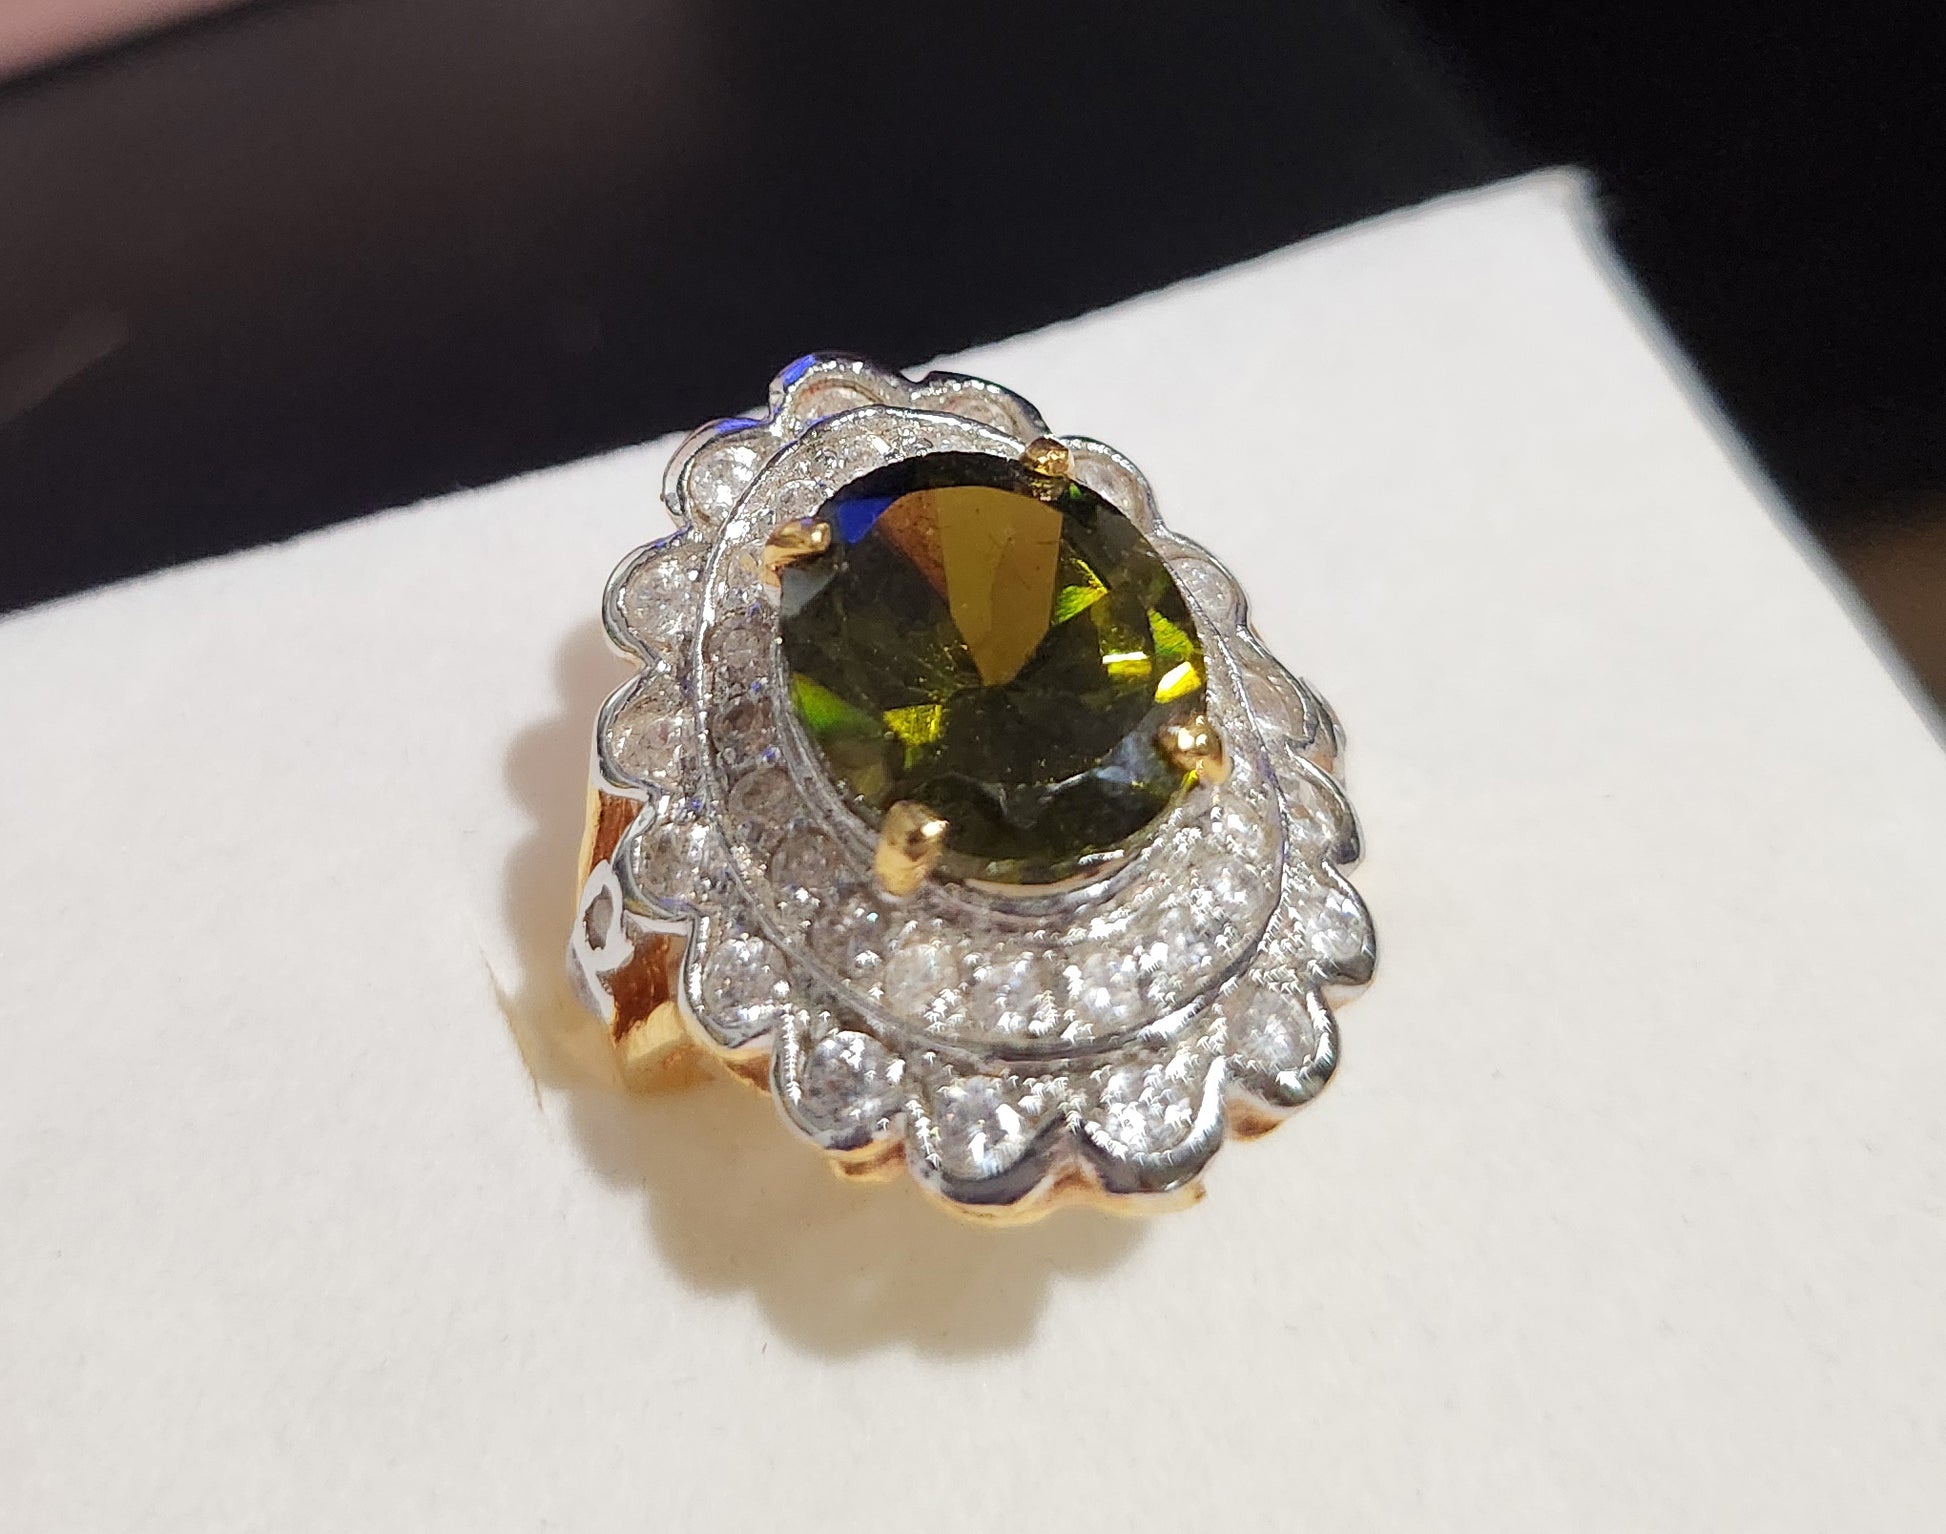 Gold-Dipped Ring with Peridot Center Stone Size 7